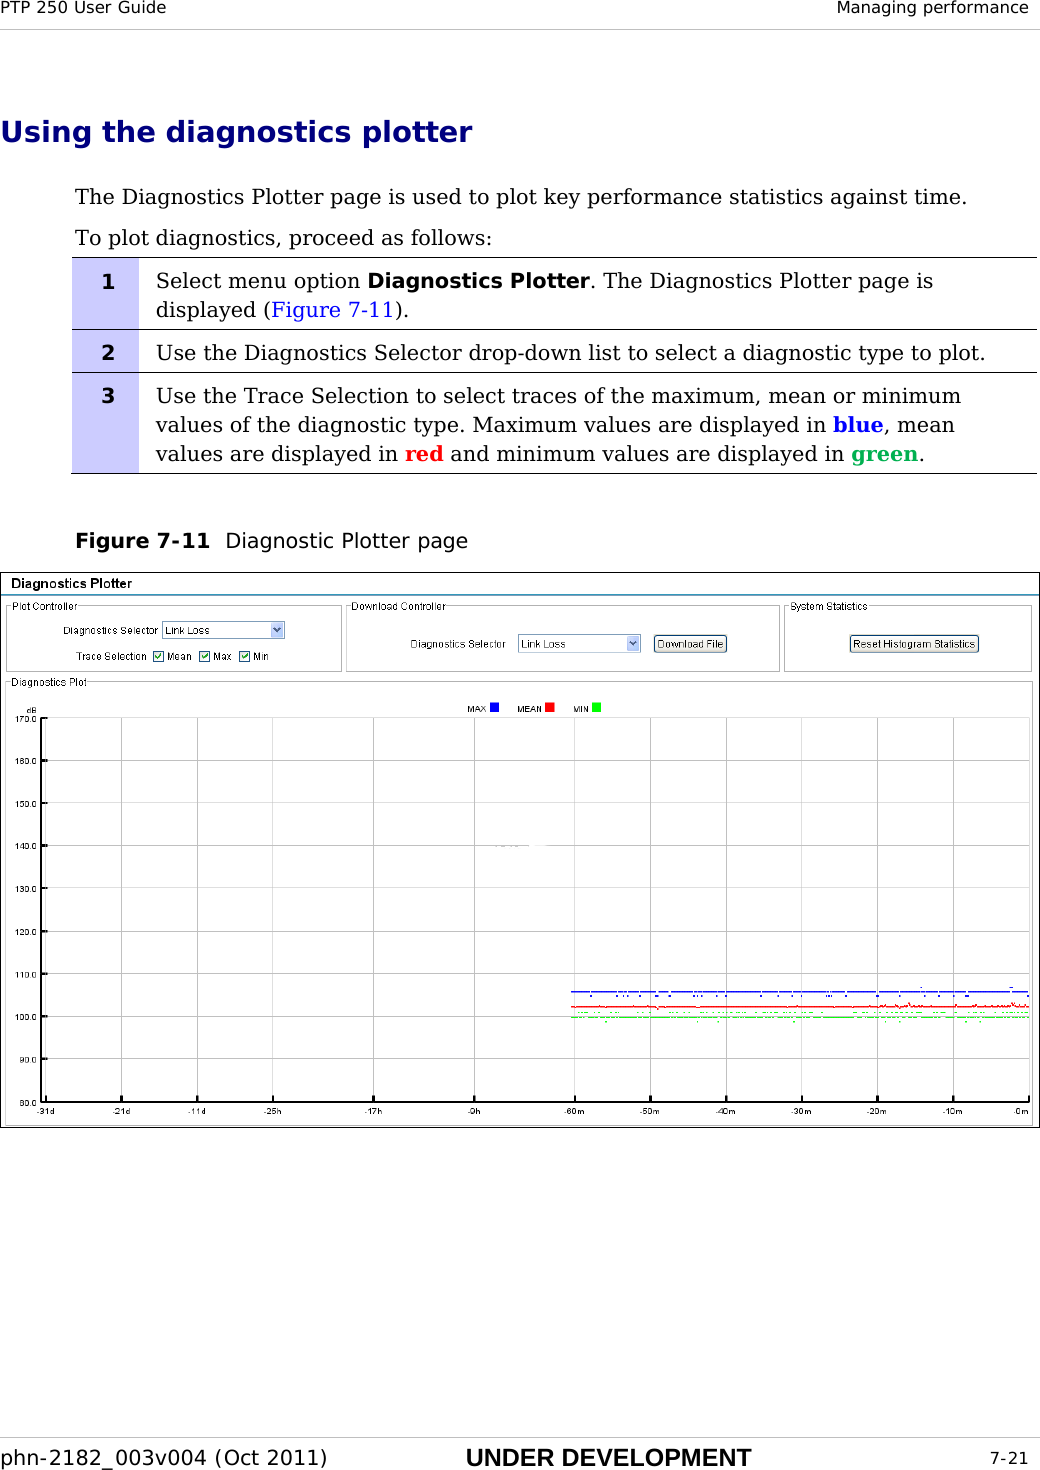 PTP 250 User Guide  Managing performance  phn-2182_003v004 (Oct 2011)  UNDER DEVELOPMENT  7-21  Using the diagnostics plotter The Diagnostics Plotter page is used to plot key performance statistics against time.  To plot diagnostics, proceed as follows: 1  Select menu option Diagnostics Plotter. The Diagnostics Plotter page is displayed (Figure 7-11). 2  Use the Diagnostics Selector drop-down list to select a diagnostic type to plot. 3  Use the Trace Selection to select traces of the maximum, mean or minimum values of the diagnostic type. Maximum values are displayed in blue, mean values are displayed in red and minimum values are displayed in green.   Figure 7-11  Diagnostic Plotter page   